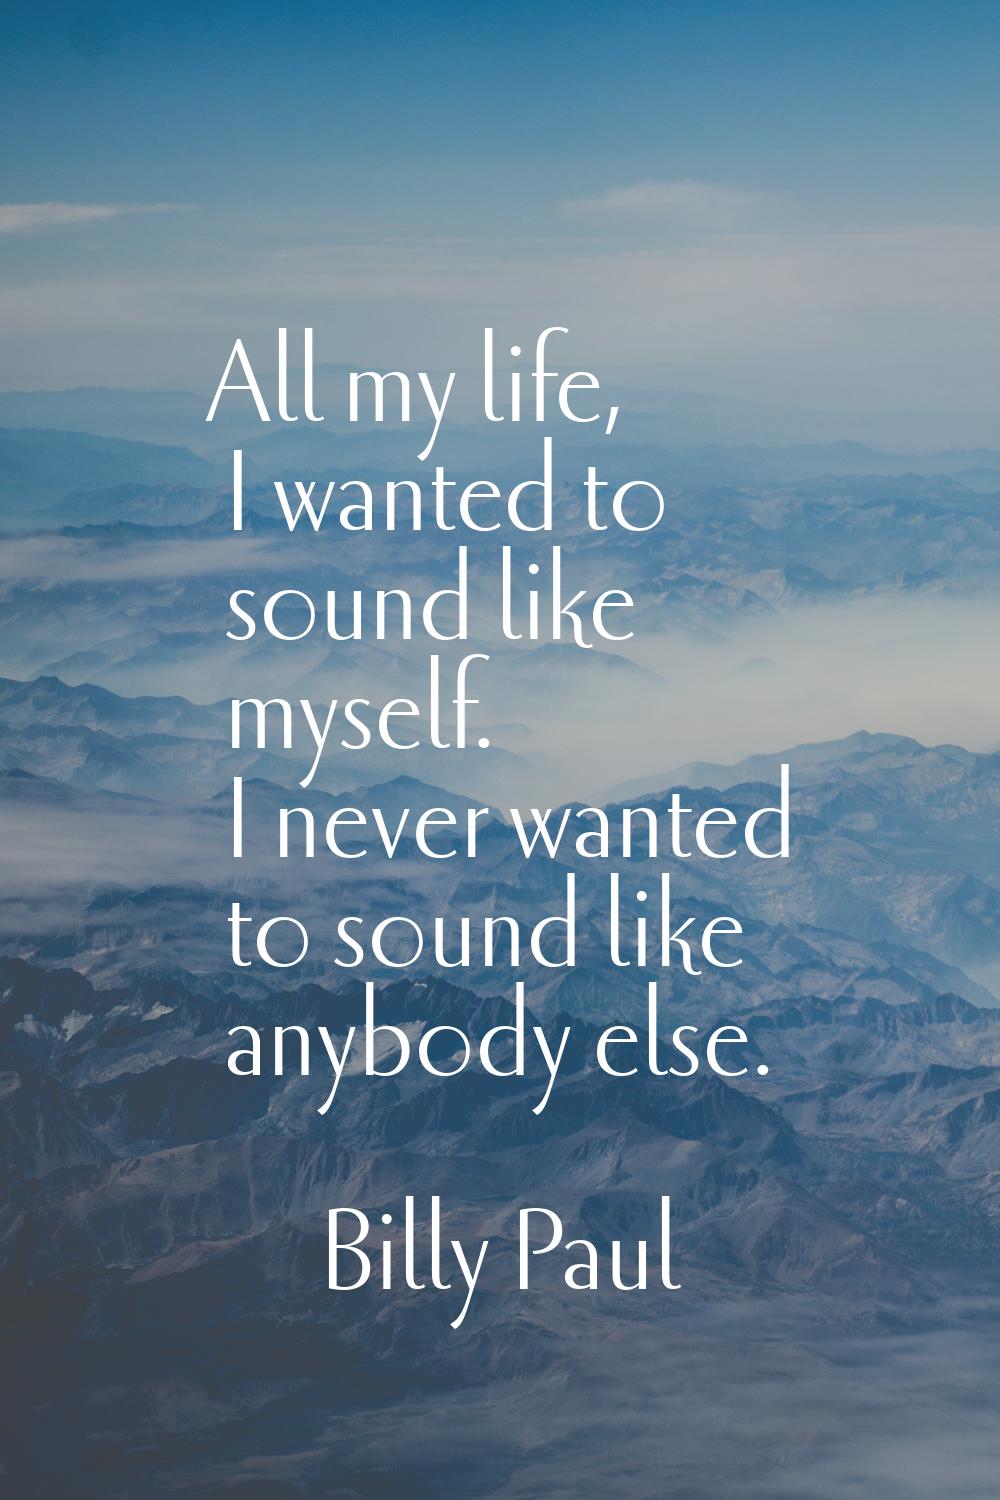 All my life, I wanted to sound like myself. I never wanted to sound like anybody else.